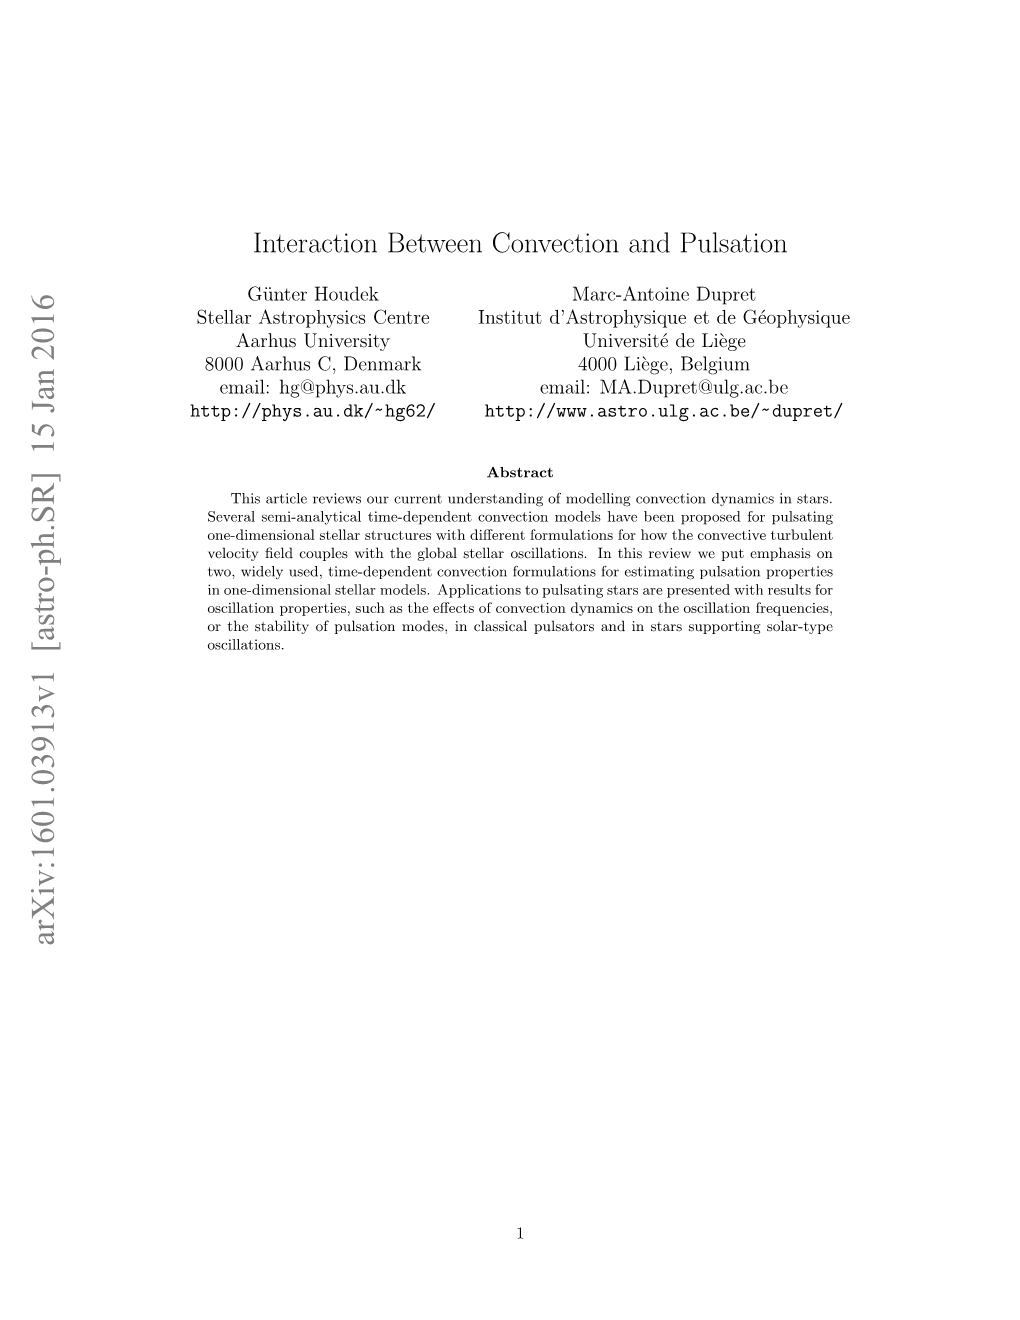 Interaction Between Convection and Pulsations in Mira Variables Is Required